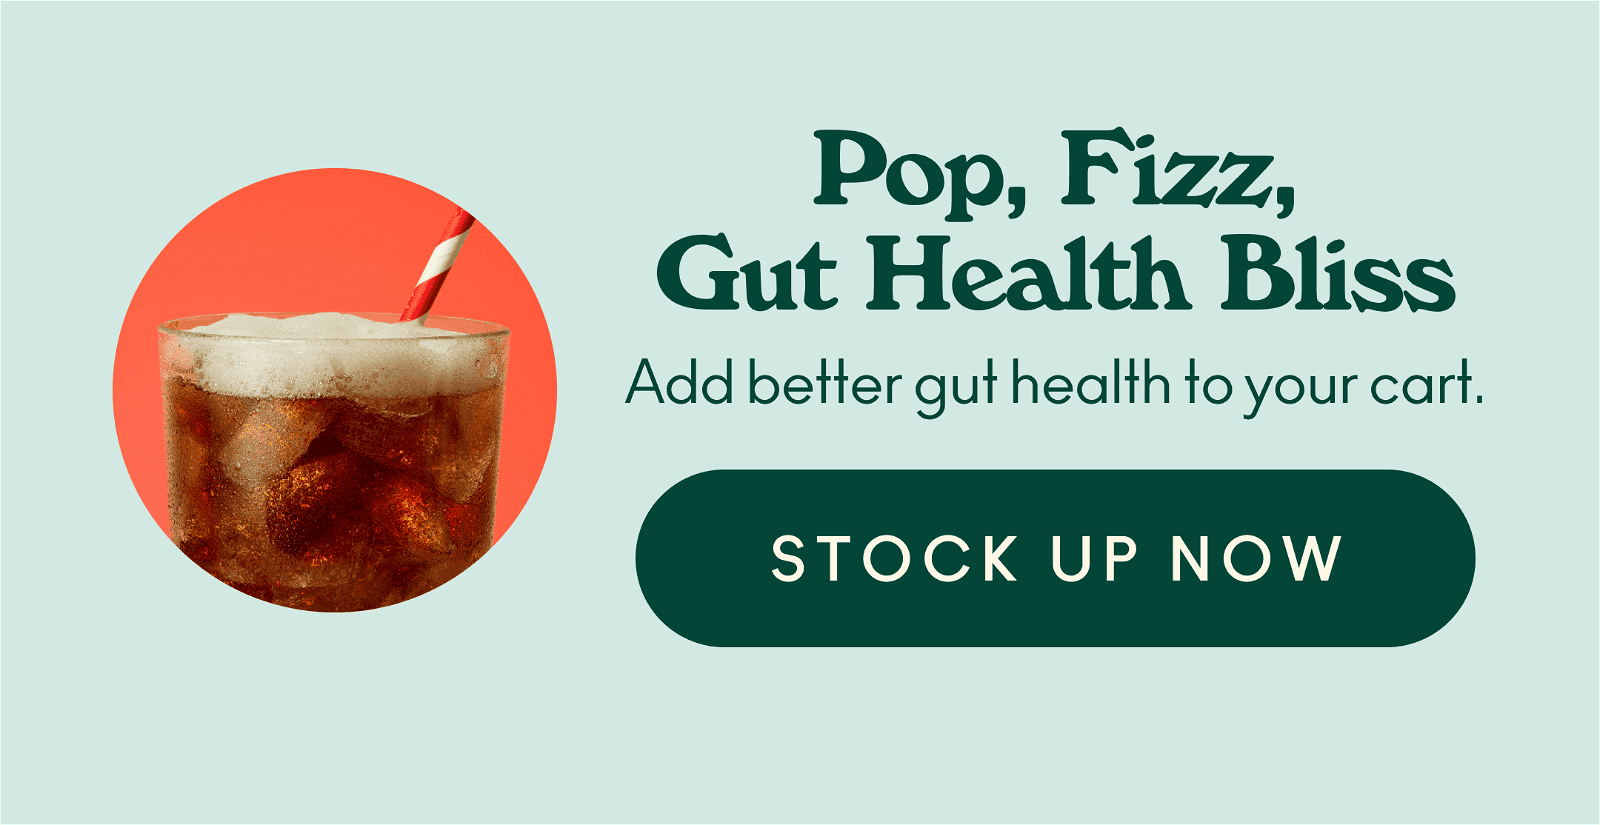 Add better gut health to your cart and stock up now!